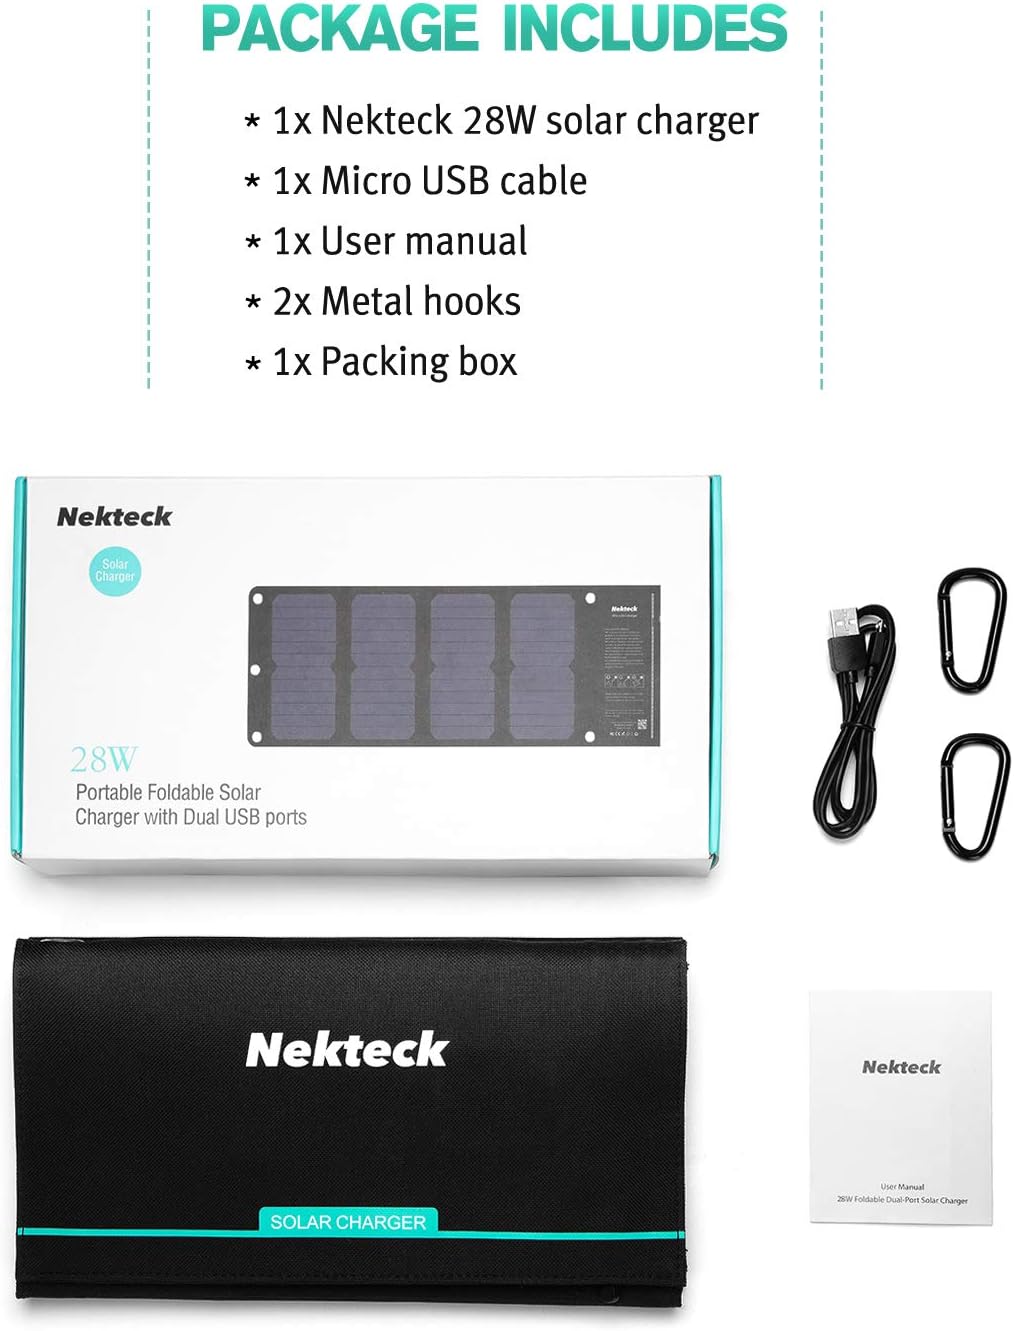 Nekteck 28W Portable Solar Charger with 2 USB Ports - IPX4 Waterproof for Hiking, Camping, and More - Compatible with iPhone, iPad, Samsung Galaxy, and Cameras - CALCUMART